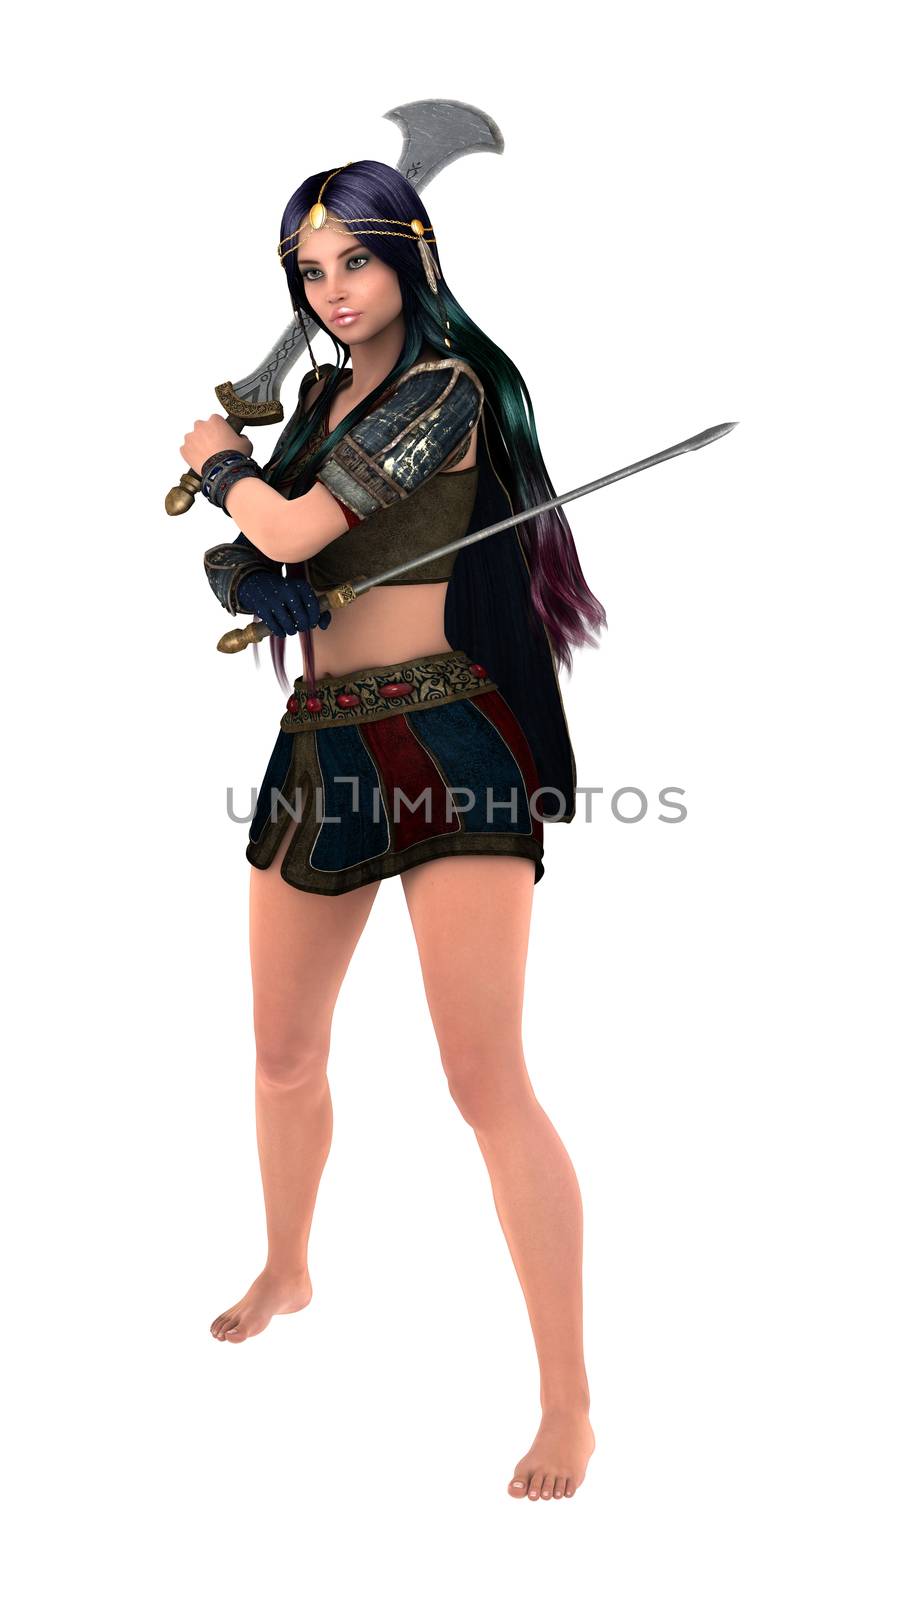 3D digital render of a beautiful warrior woman holding two swords isolated on white background